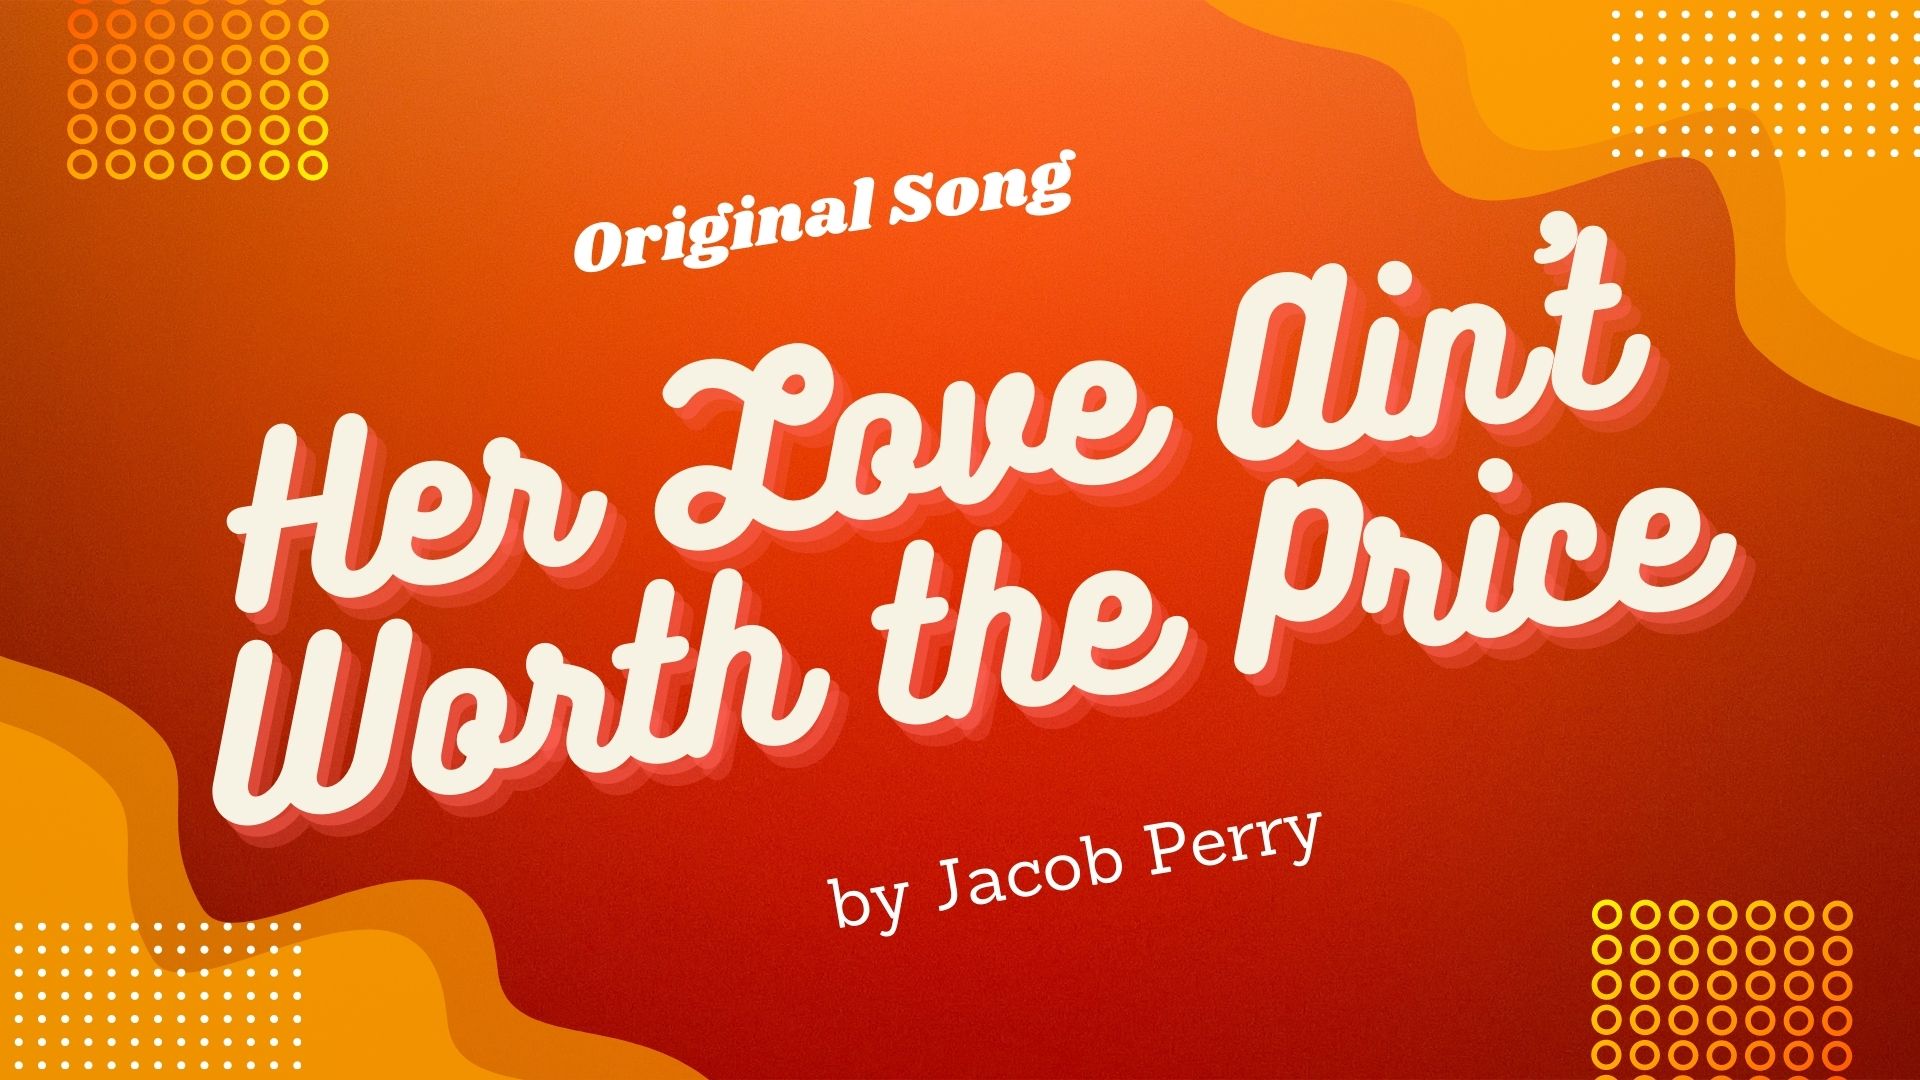 Saving lives as a paramedic during the day and a musician at night, ‘Jacob Perry’ unleashes his cool country anthem ‘Her Love Ain’t Worth The Price’.